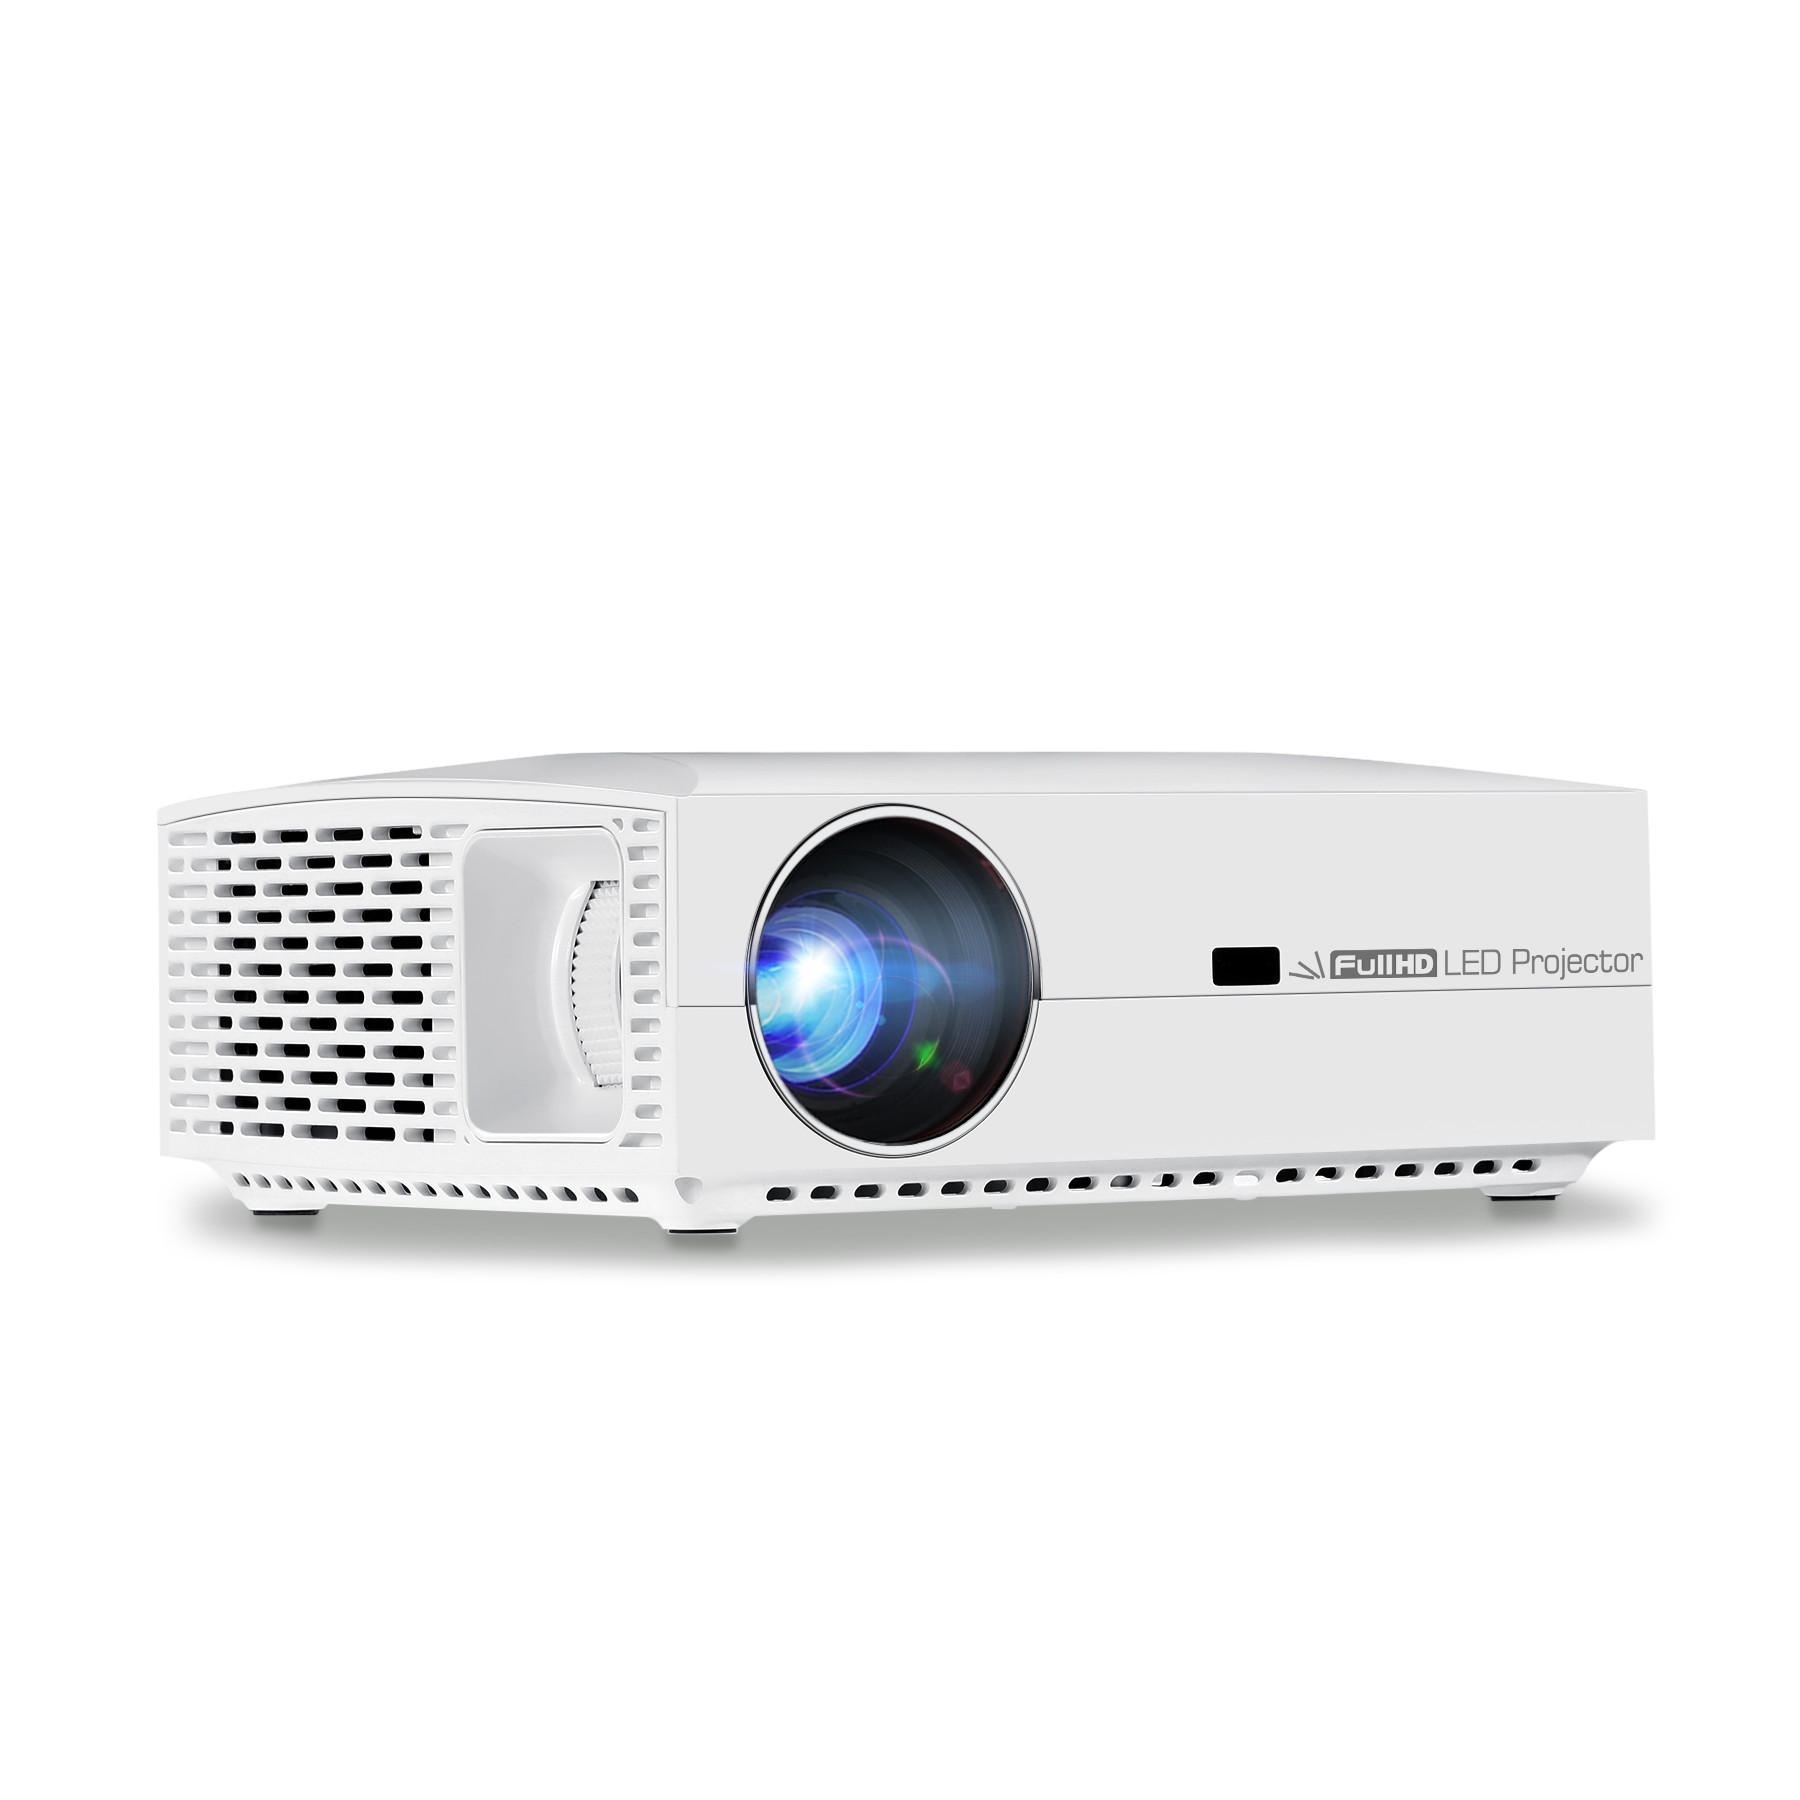 

AUN F30UP Full HD Projector 1920x1080P 6500 Lumens Android 6.0 2G+16G WIFI MINI LED Projector for Home Cinema Support 4K